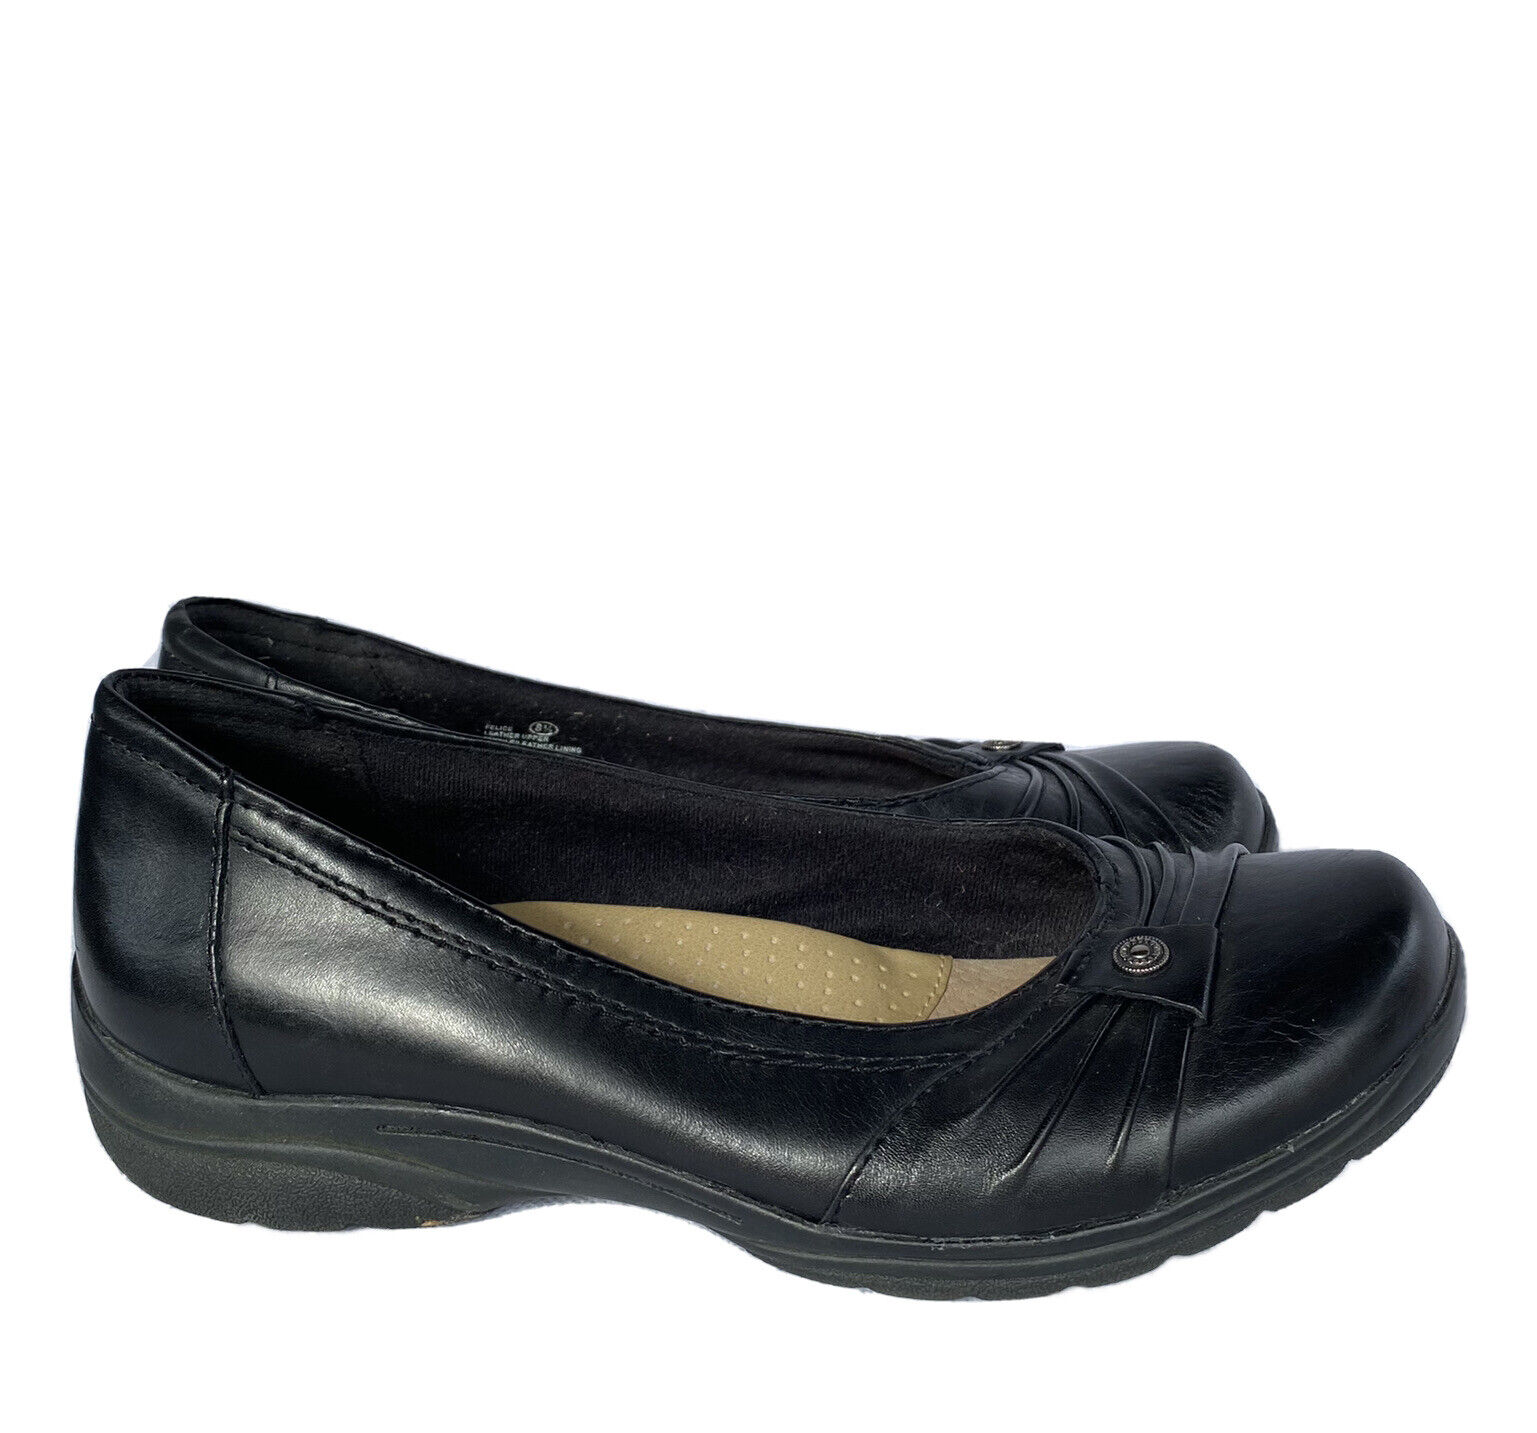 Planet Shoes Black Leather Flats Size 8.5 Alice Comfort Slip On